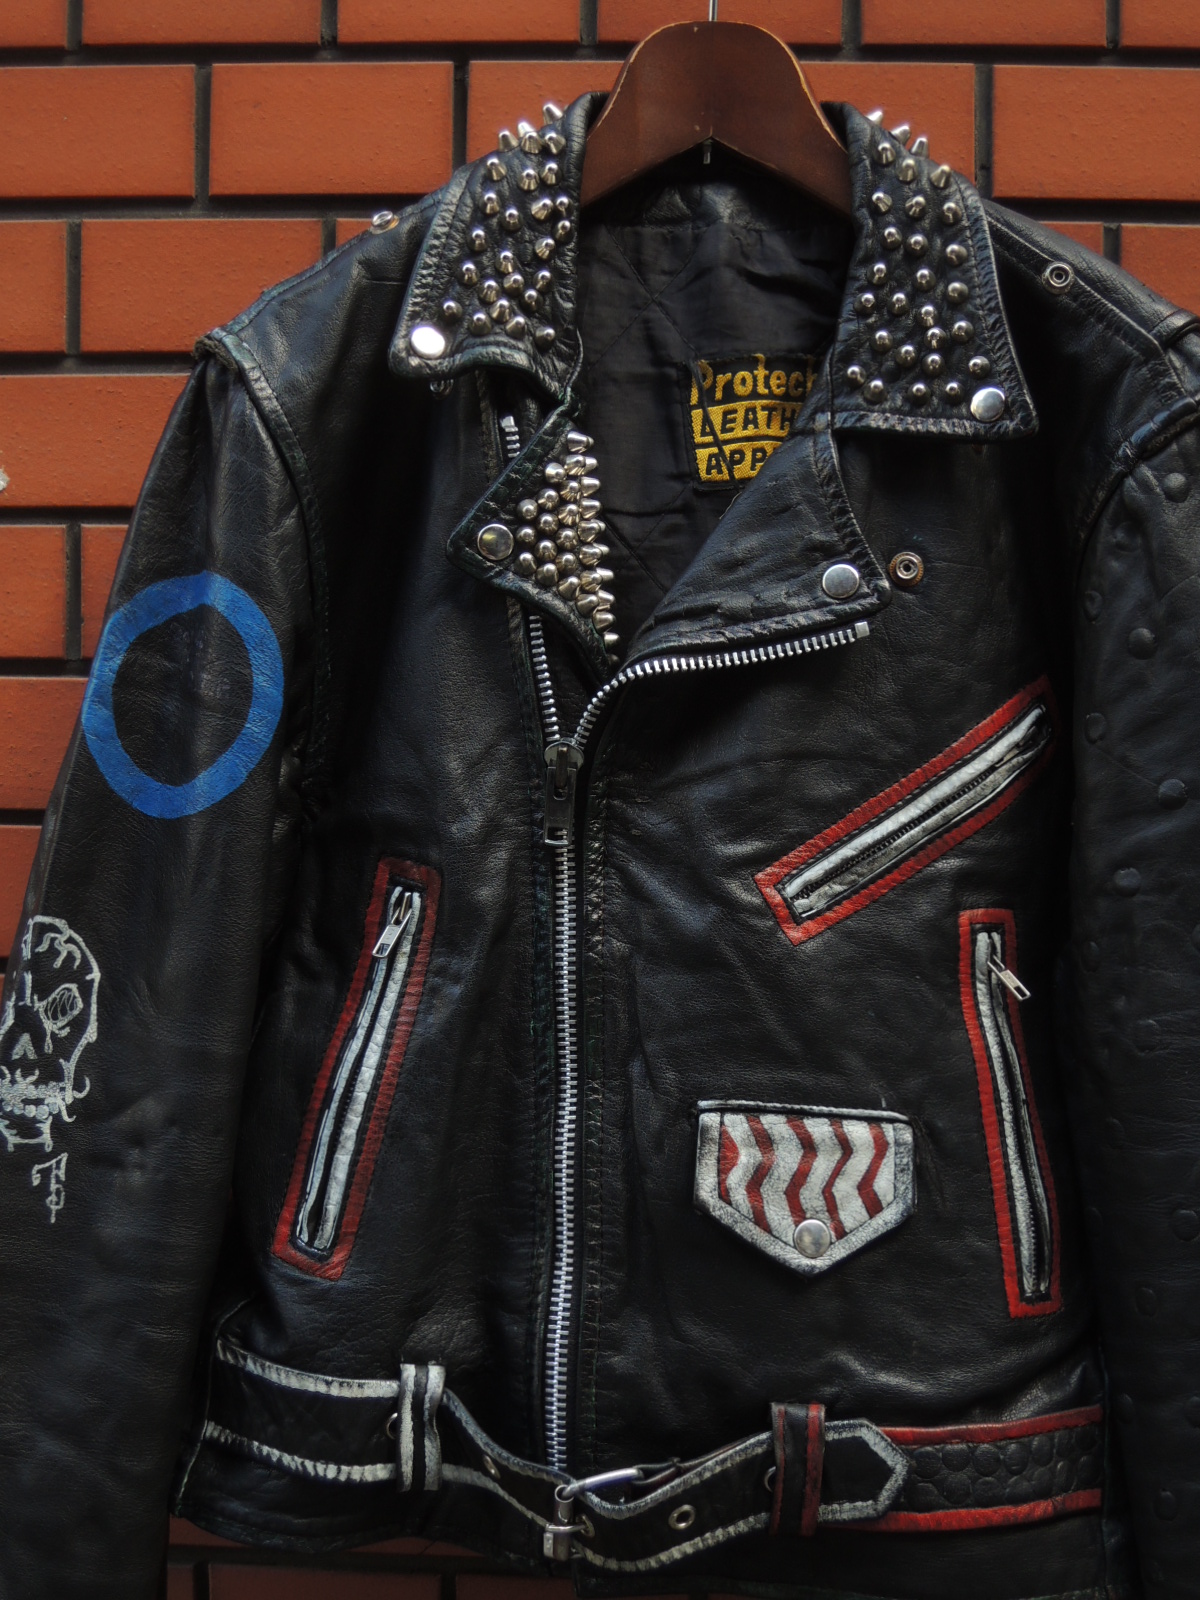 70 ～ 80's Protech LEATHER APPAREL riders jacket: container